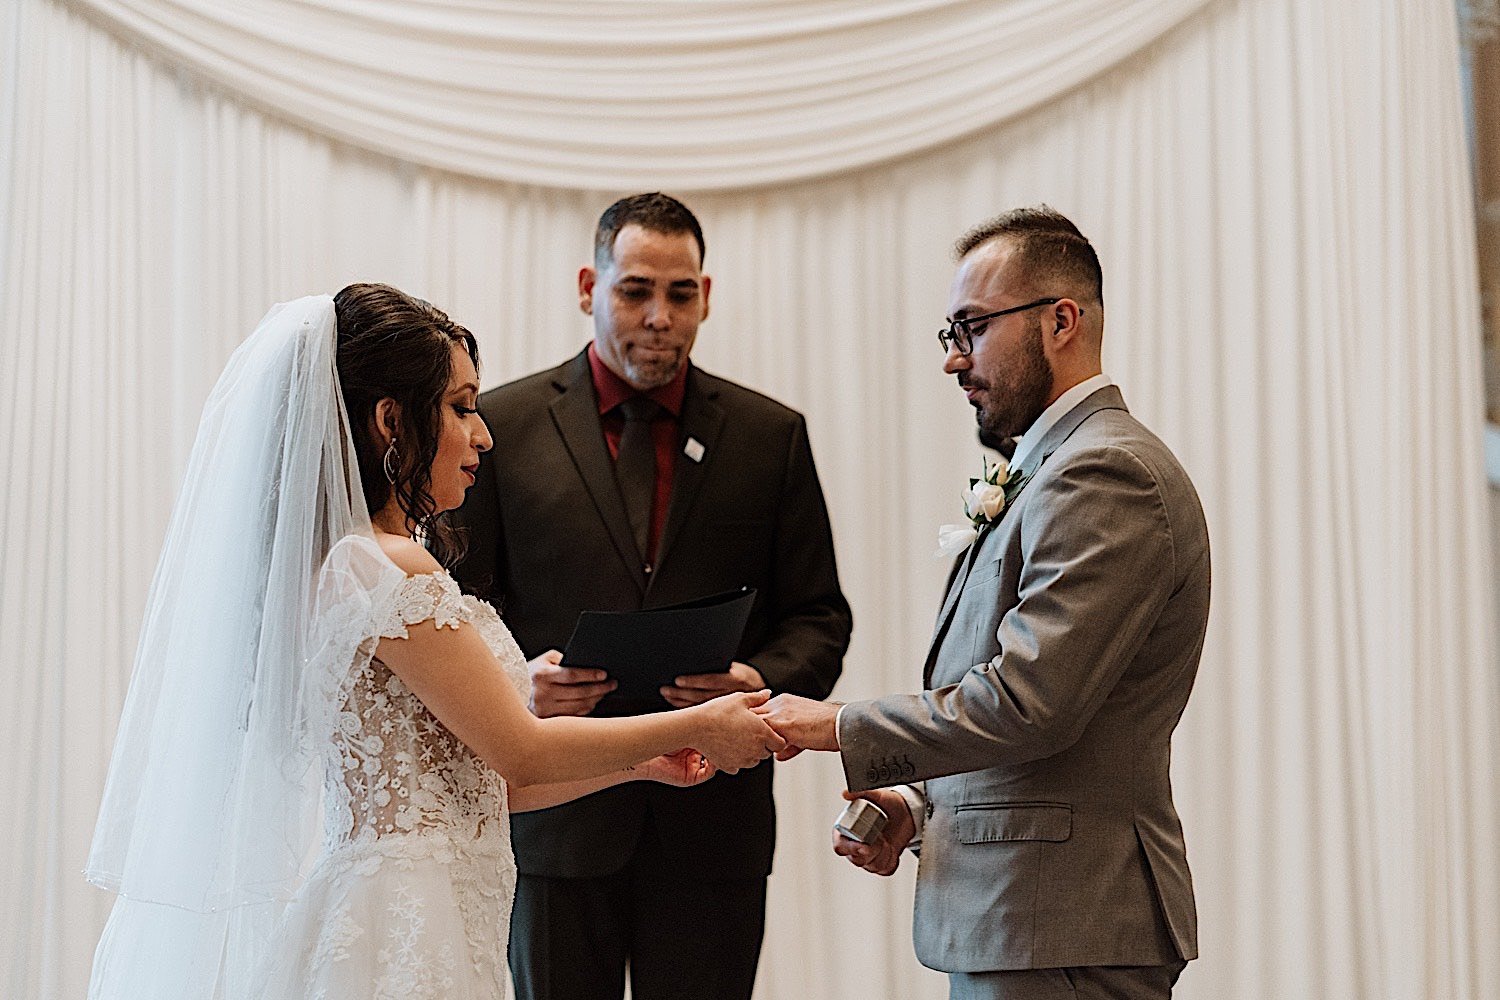 Bride and groom exchange rings during their wedding ceremony as the pastor watches